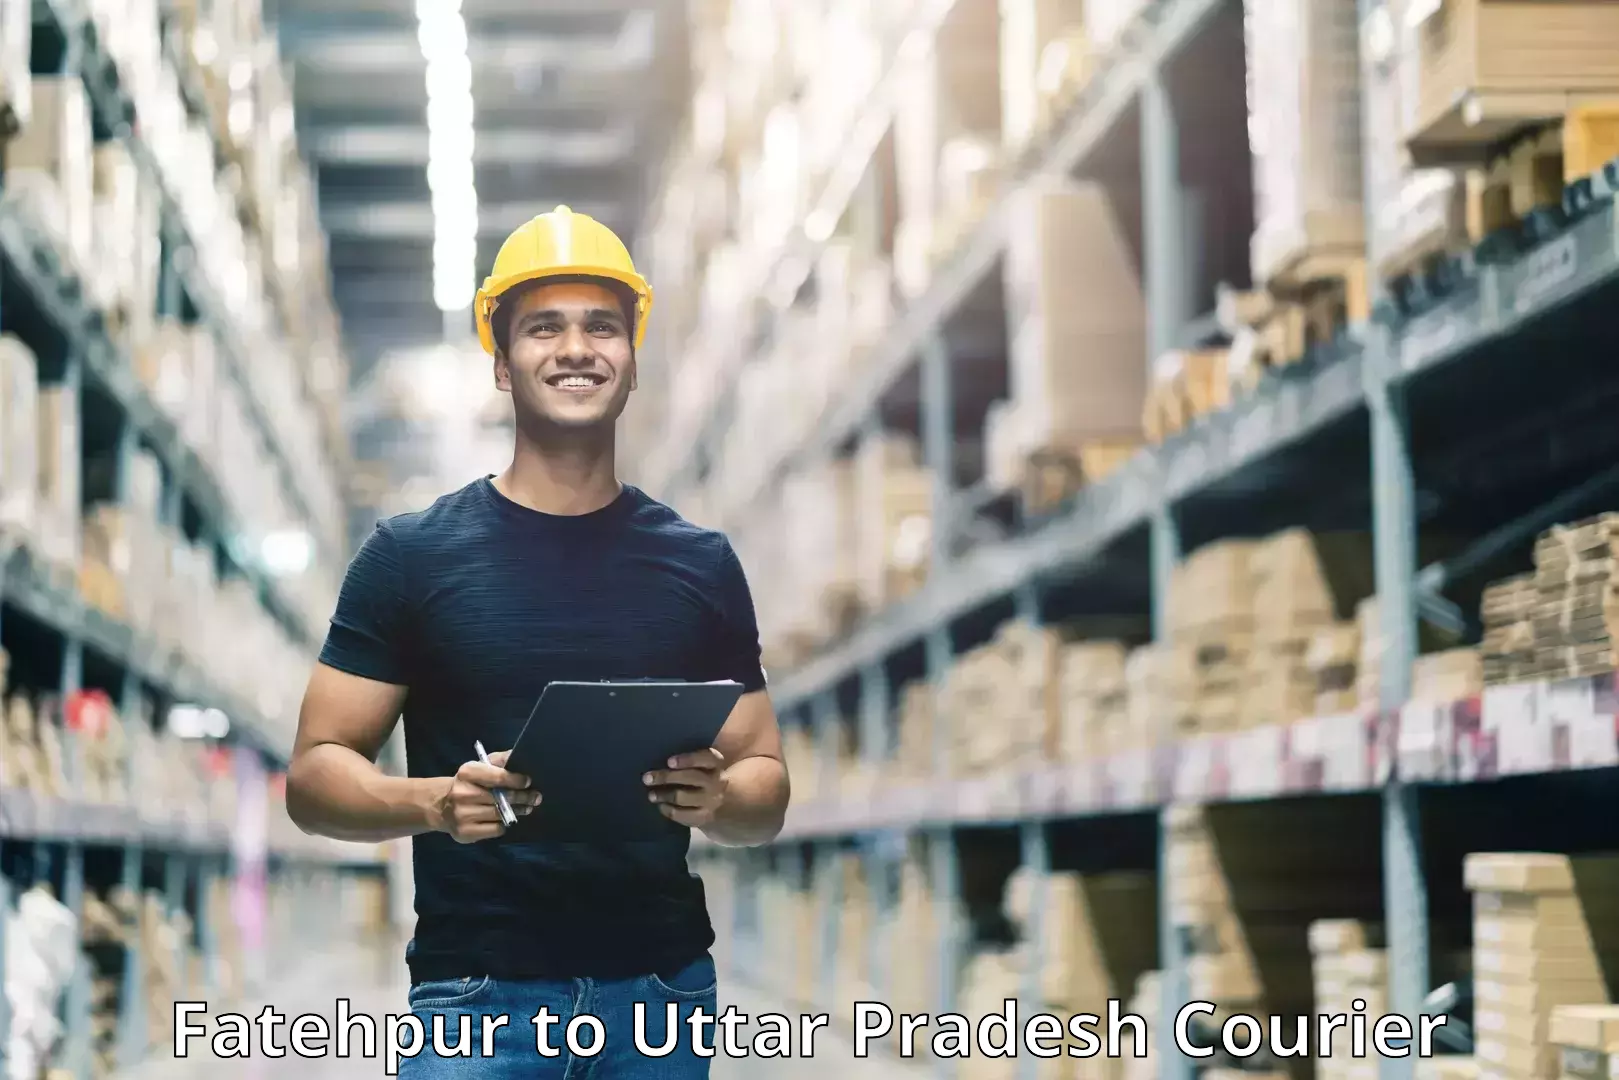 Nationwide delivery network in Fatehpur to Uttar Pradesh